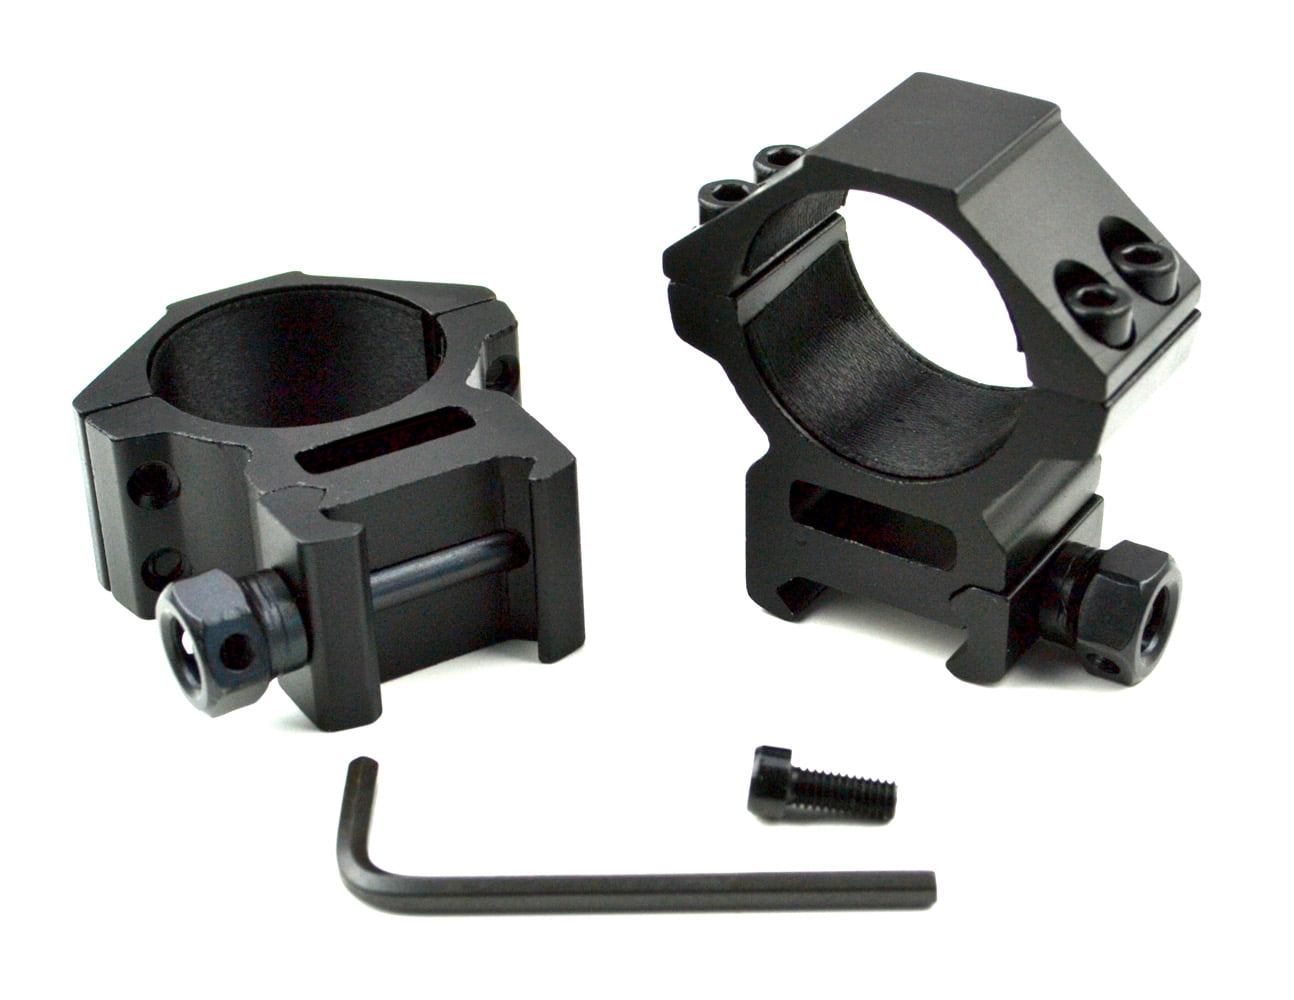 Dual Ring 1" 25.4mm High Profile See-throu Rifle Sight Scope Mount for 20mm Rail 